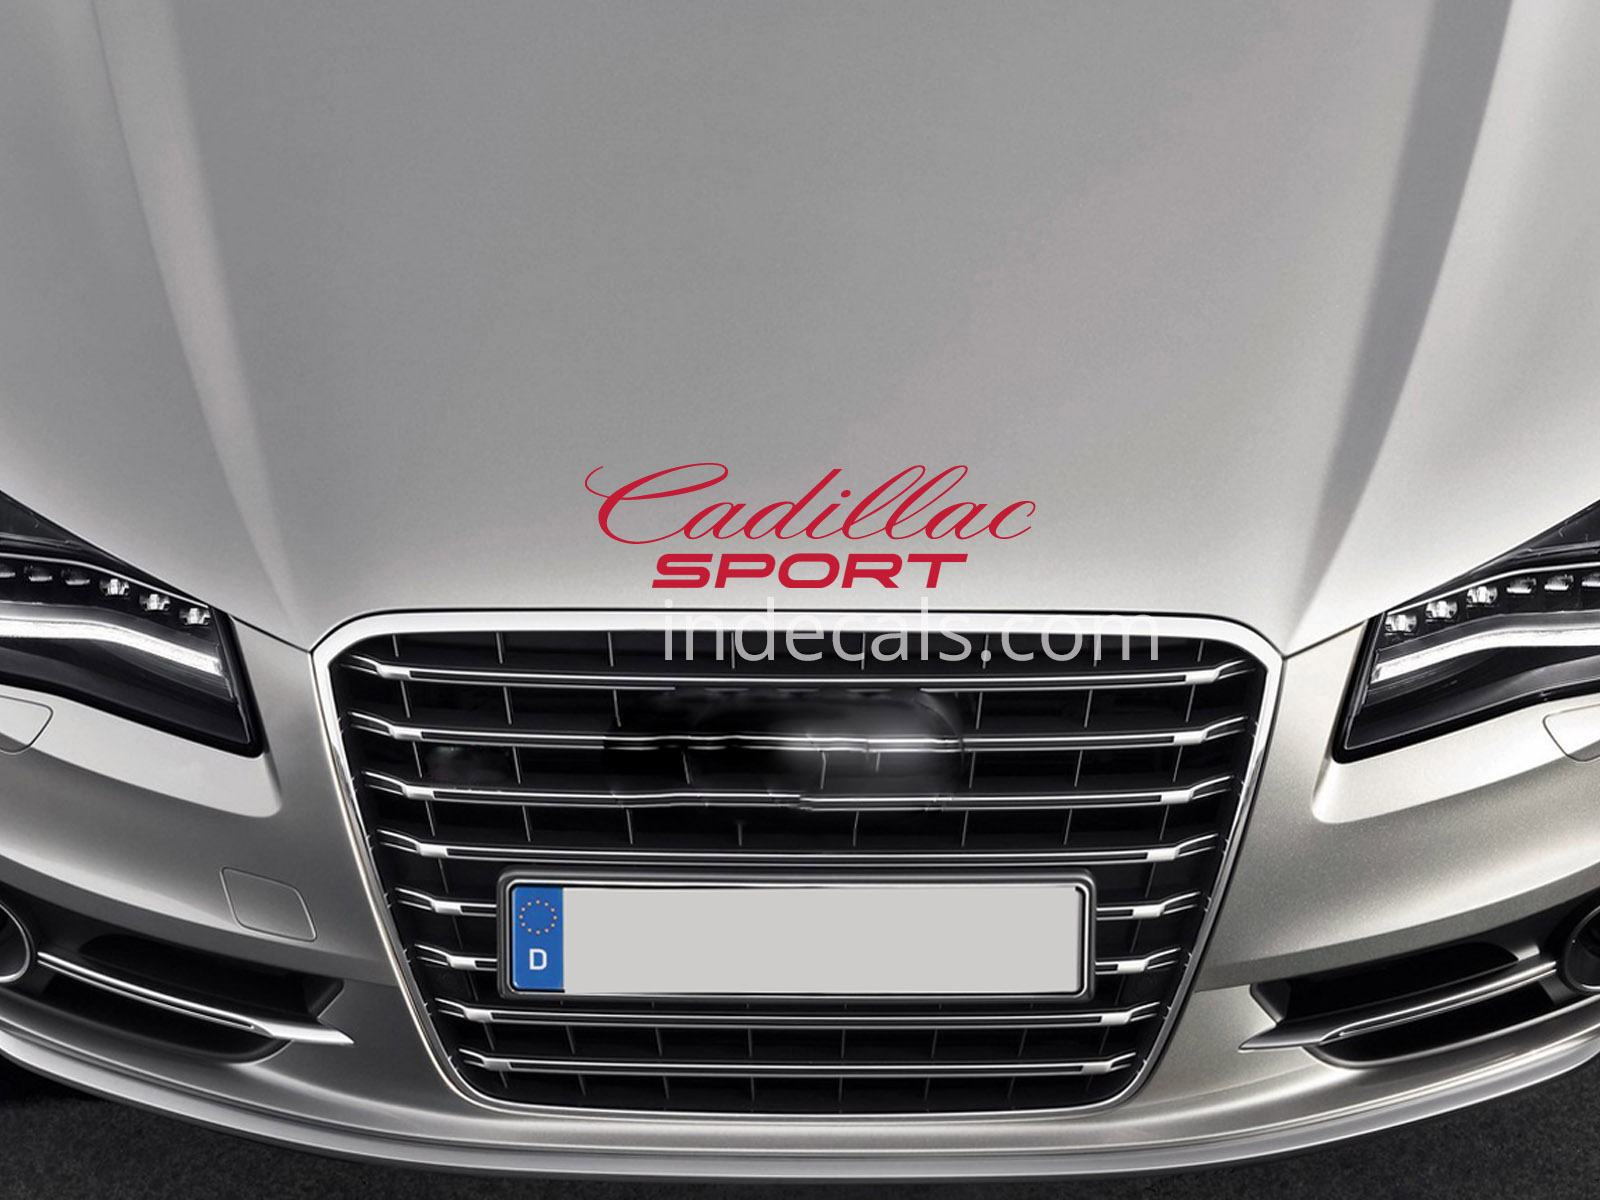 1 x Cadillac Sport Sticker for Bonnet - Red